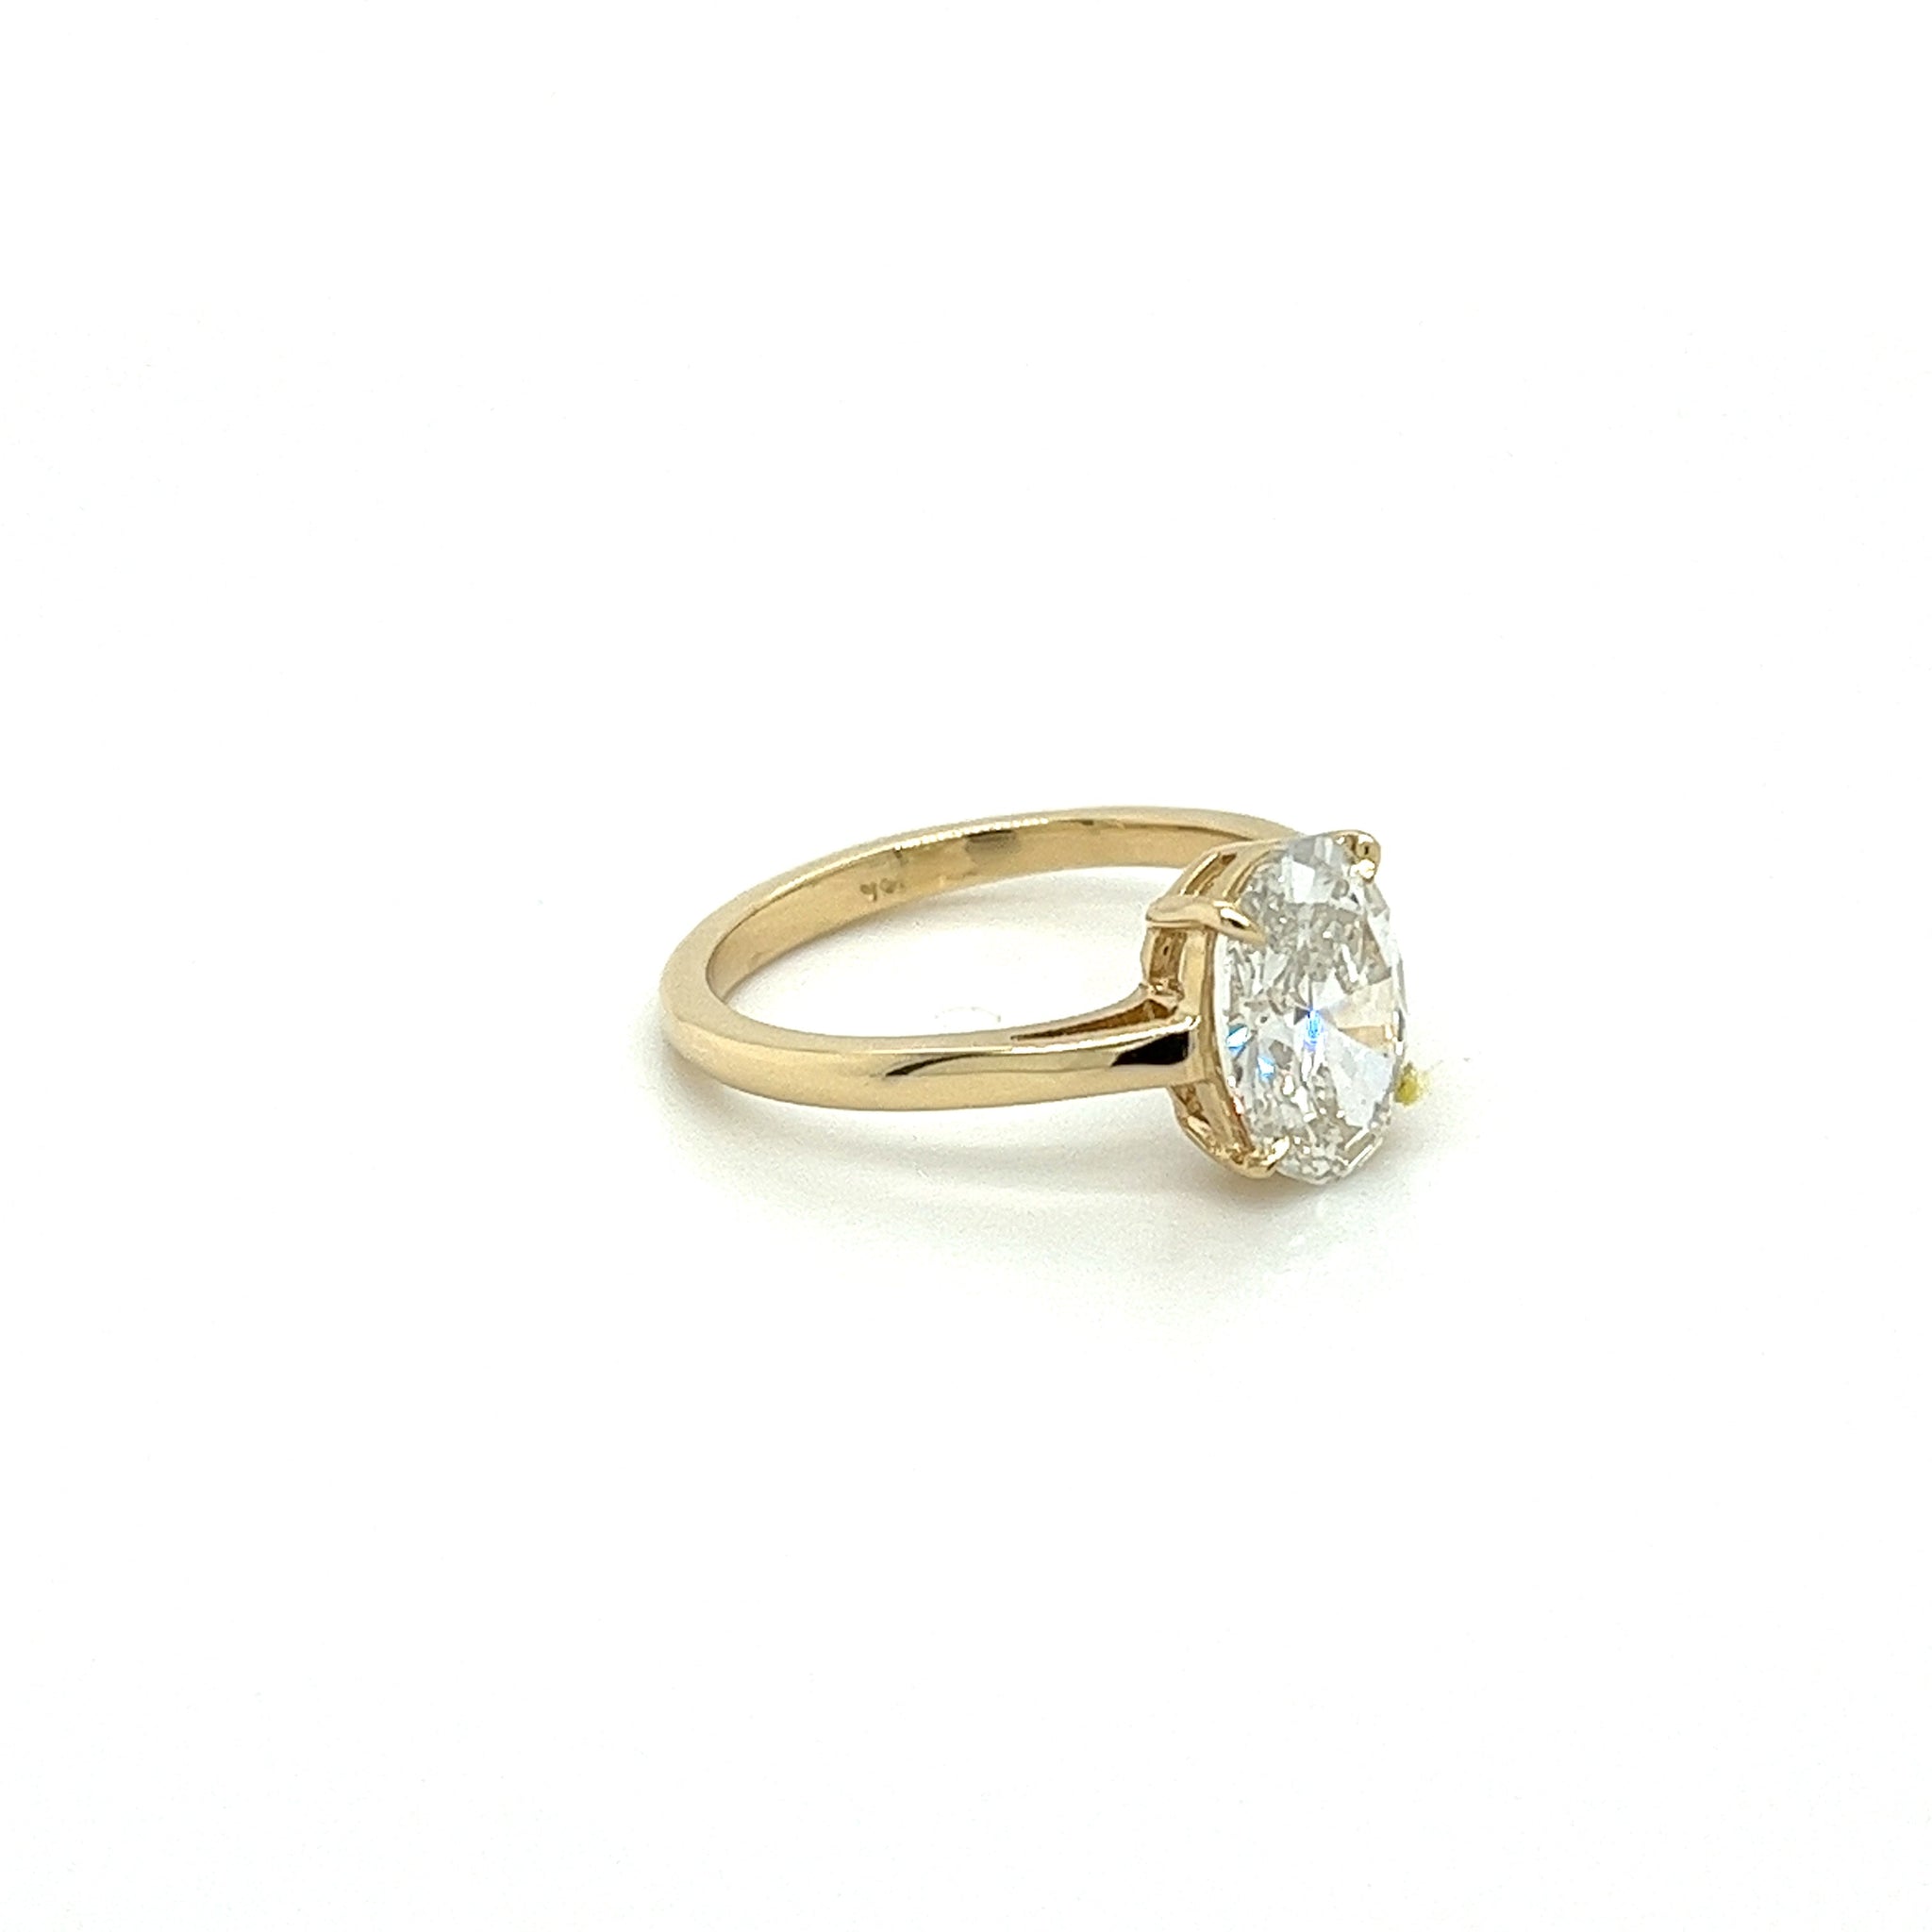 2.06 Carat Oval Cut Lab Grown Diamond CVD Ring in 14K Yellow Gold Low Profile Setting-Engagement Ring-ASSAY